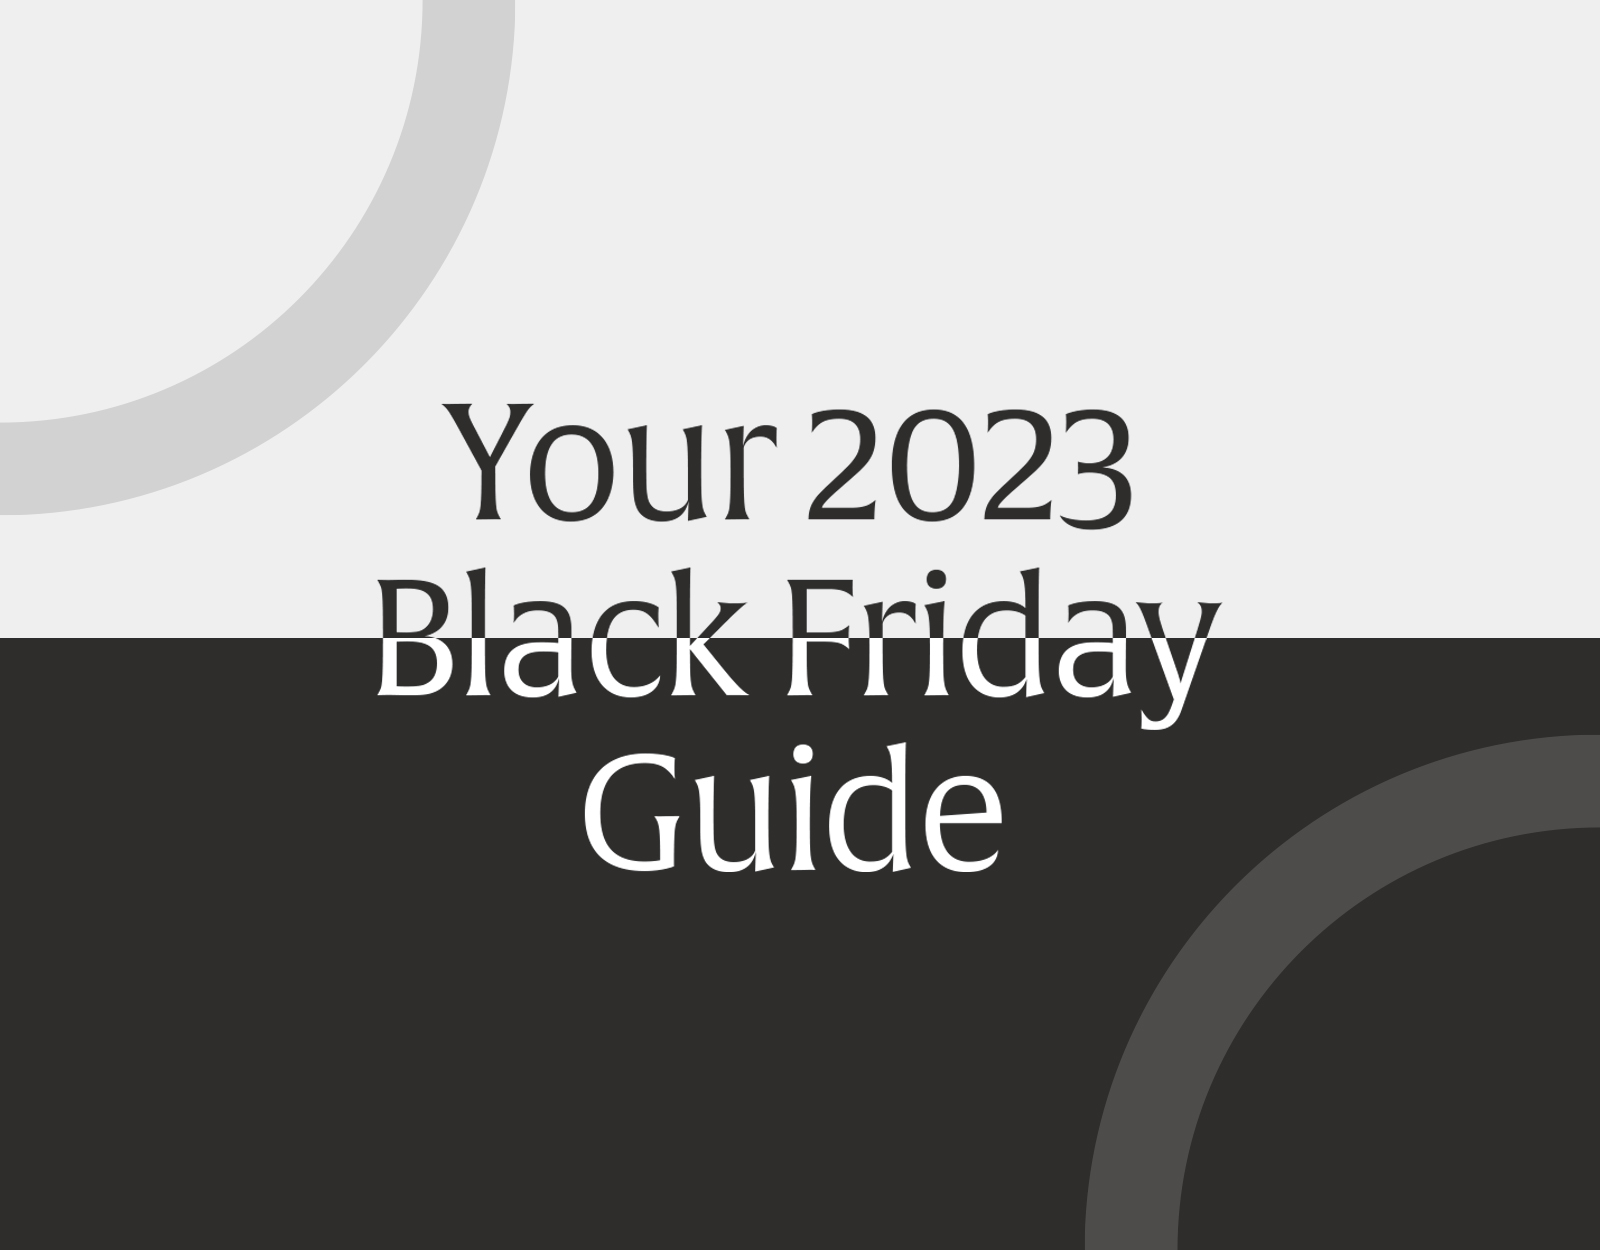 Your 2023 Black Friday Guide